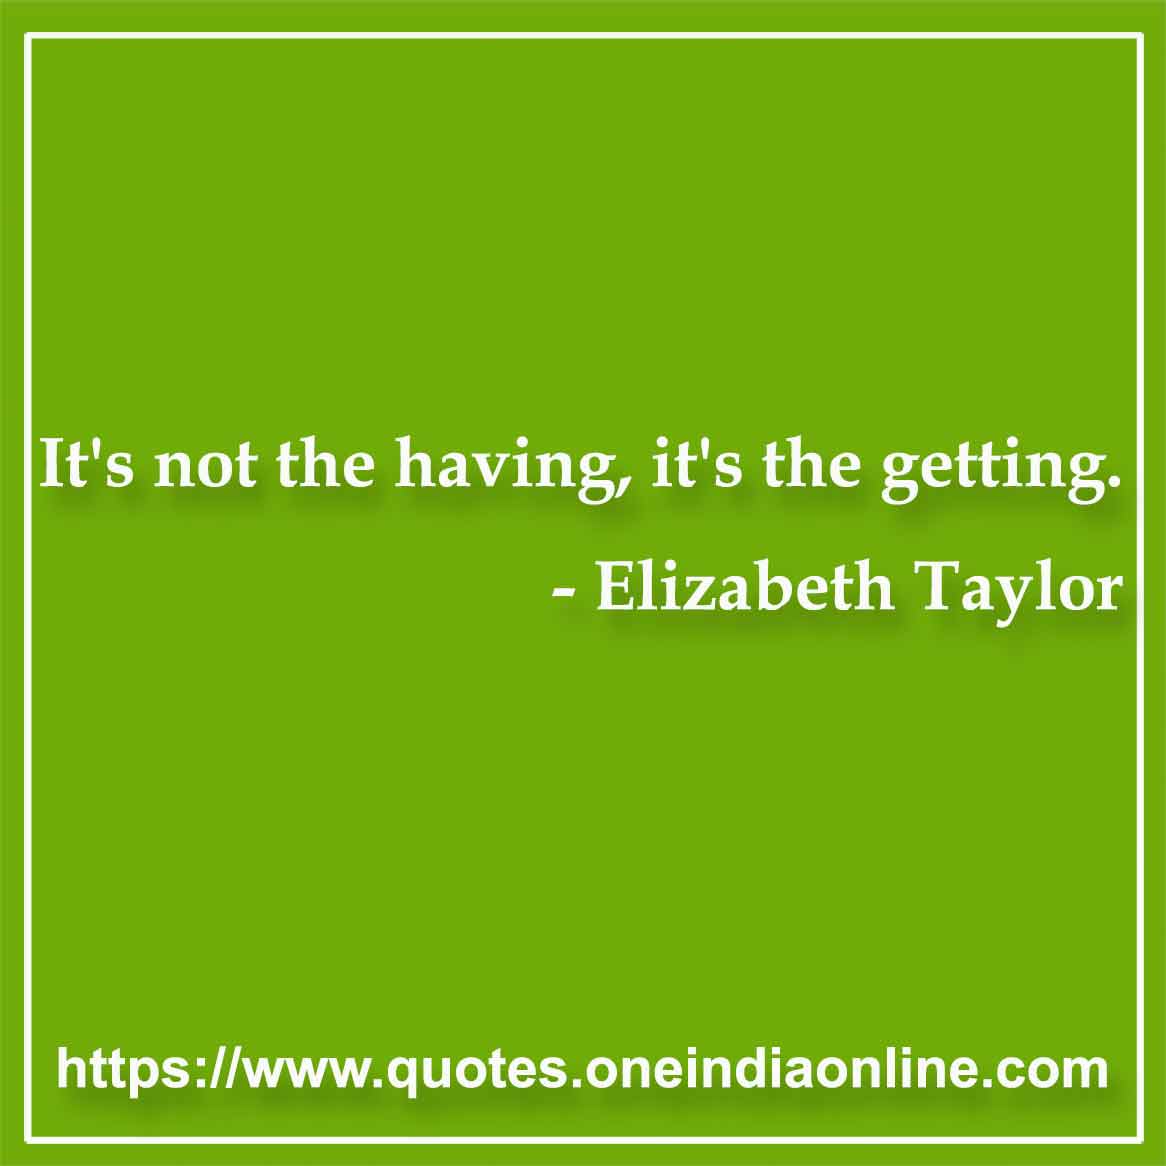 It's not the having, it's the getting.

-  by Elizabeth Taylor